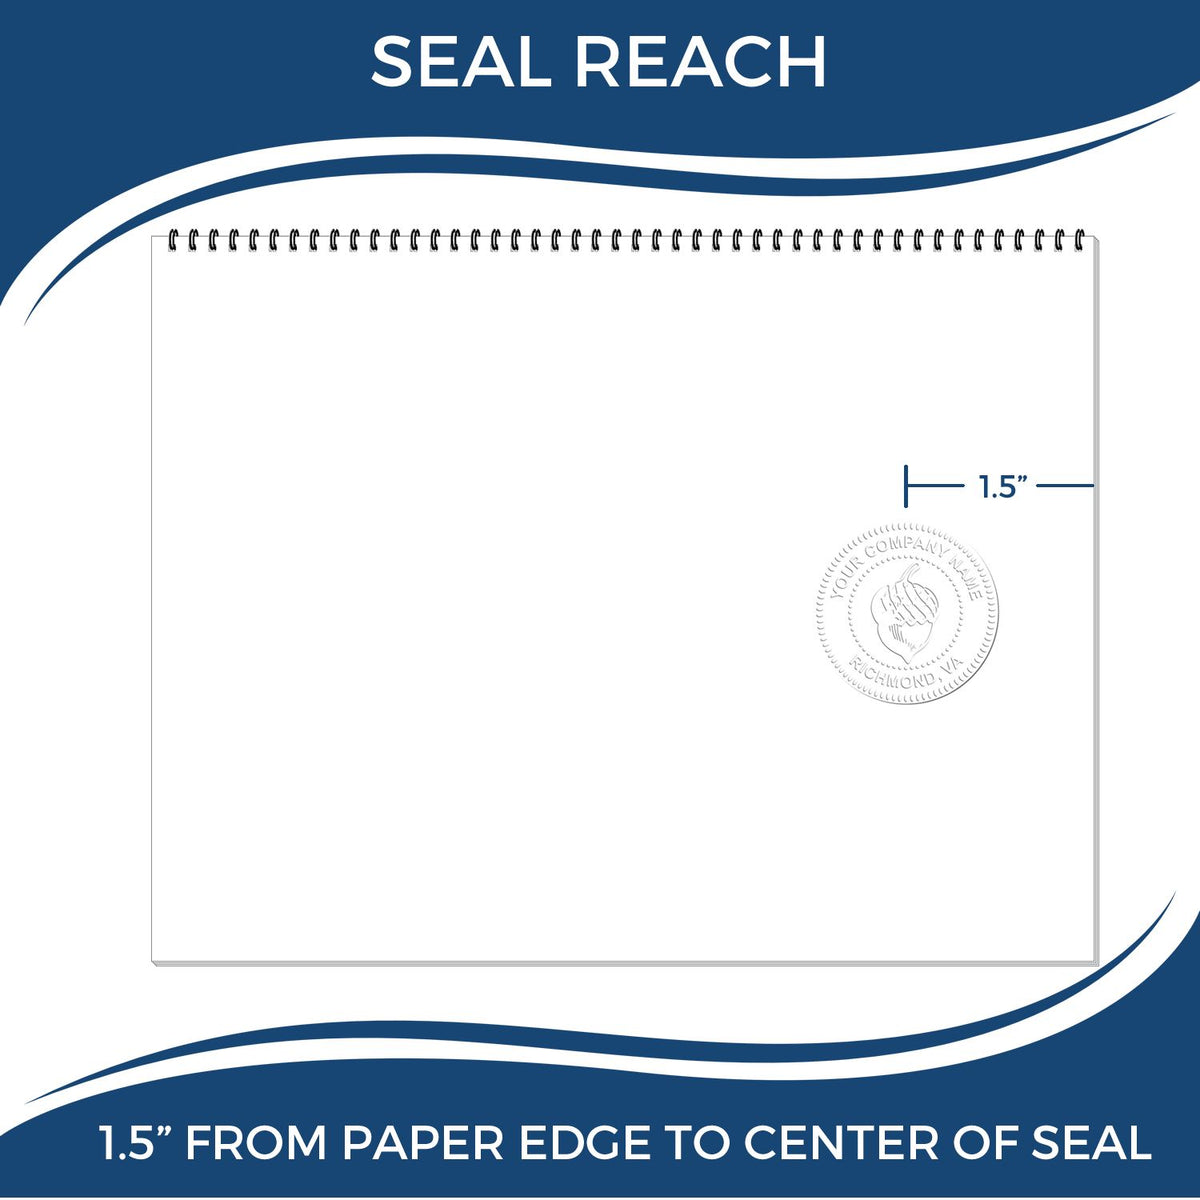 An infographic showing the seal reach which is represented by a ruler and a miniature seal image of the State of New Hampshire Soft Land Surveyor Embossing Seal